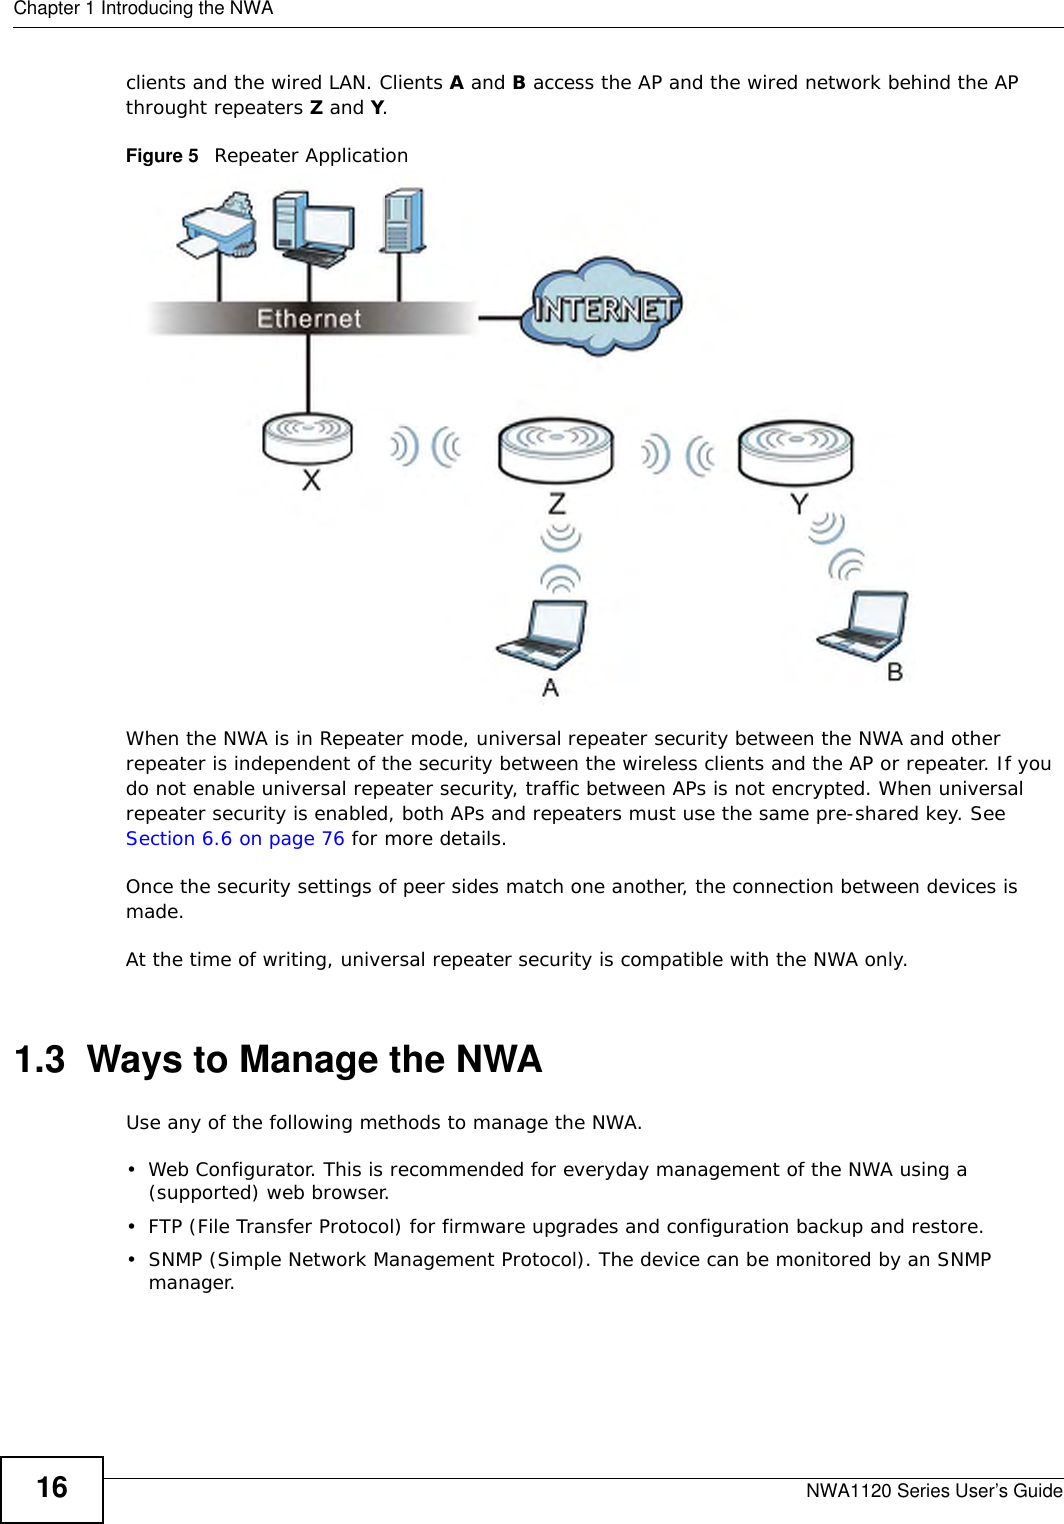 Chapter 1 Introducing the NWANWA1120 Series User’s Guide16clients and the wired LAN. Clients A and B access the AP and the wired network behind the AP throught repeaters Z and Y.Figure 5   Repeater ApplicationWhen the NWA is in Repeater mode, universal repeater security between the NWA and other repeater is independent of the security between the wireless clients and the AP or repeater. If you do not enable universal repeater security, traffic between APs is not encrypted. When universal repeater security is enabled, both APs and repeaters must use the same pre-shared key. See Section 6.6 on page 76 for more details. Once the security settings of peer sides match one another, the connection between devices is made.At the time of writing, universal repeater security is compatible with the NWA only. 1.3  Ways to Manage the NWAUse any of the following methods to manage the NWA.• Web Configurator. This is recommended for everyday management of the NWA using a (supported) web browser.• FTP (File Transfer Protocol) for firmware upgrades and configuration backup and restore.• SNMP (Simple Network Management Protocol). The device can be monitored by an SNMP manager.